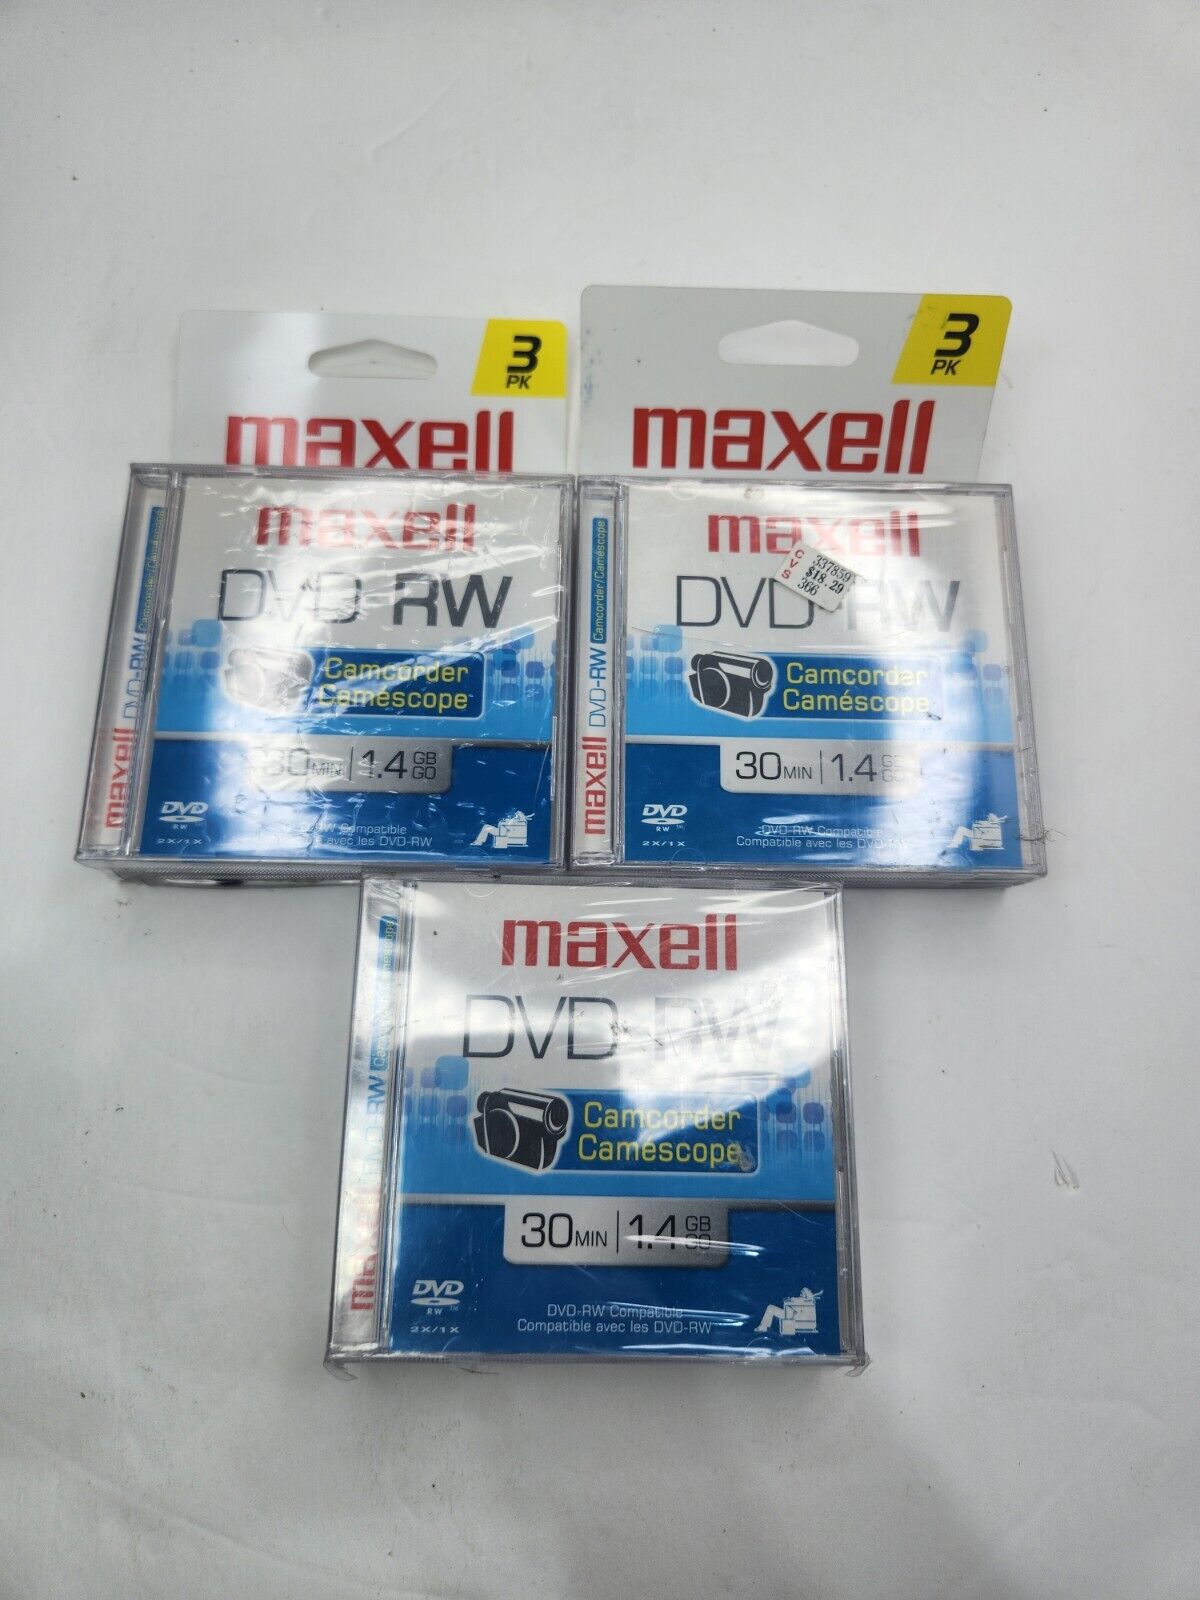 MAXELL DVD-R CAMCORDER 9-PACK DISCS 30MIN 1.4GB DVD NEW SEALED